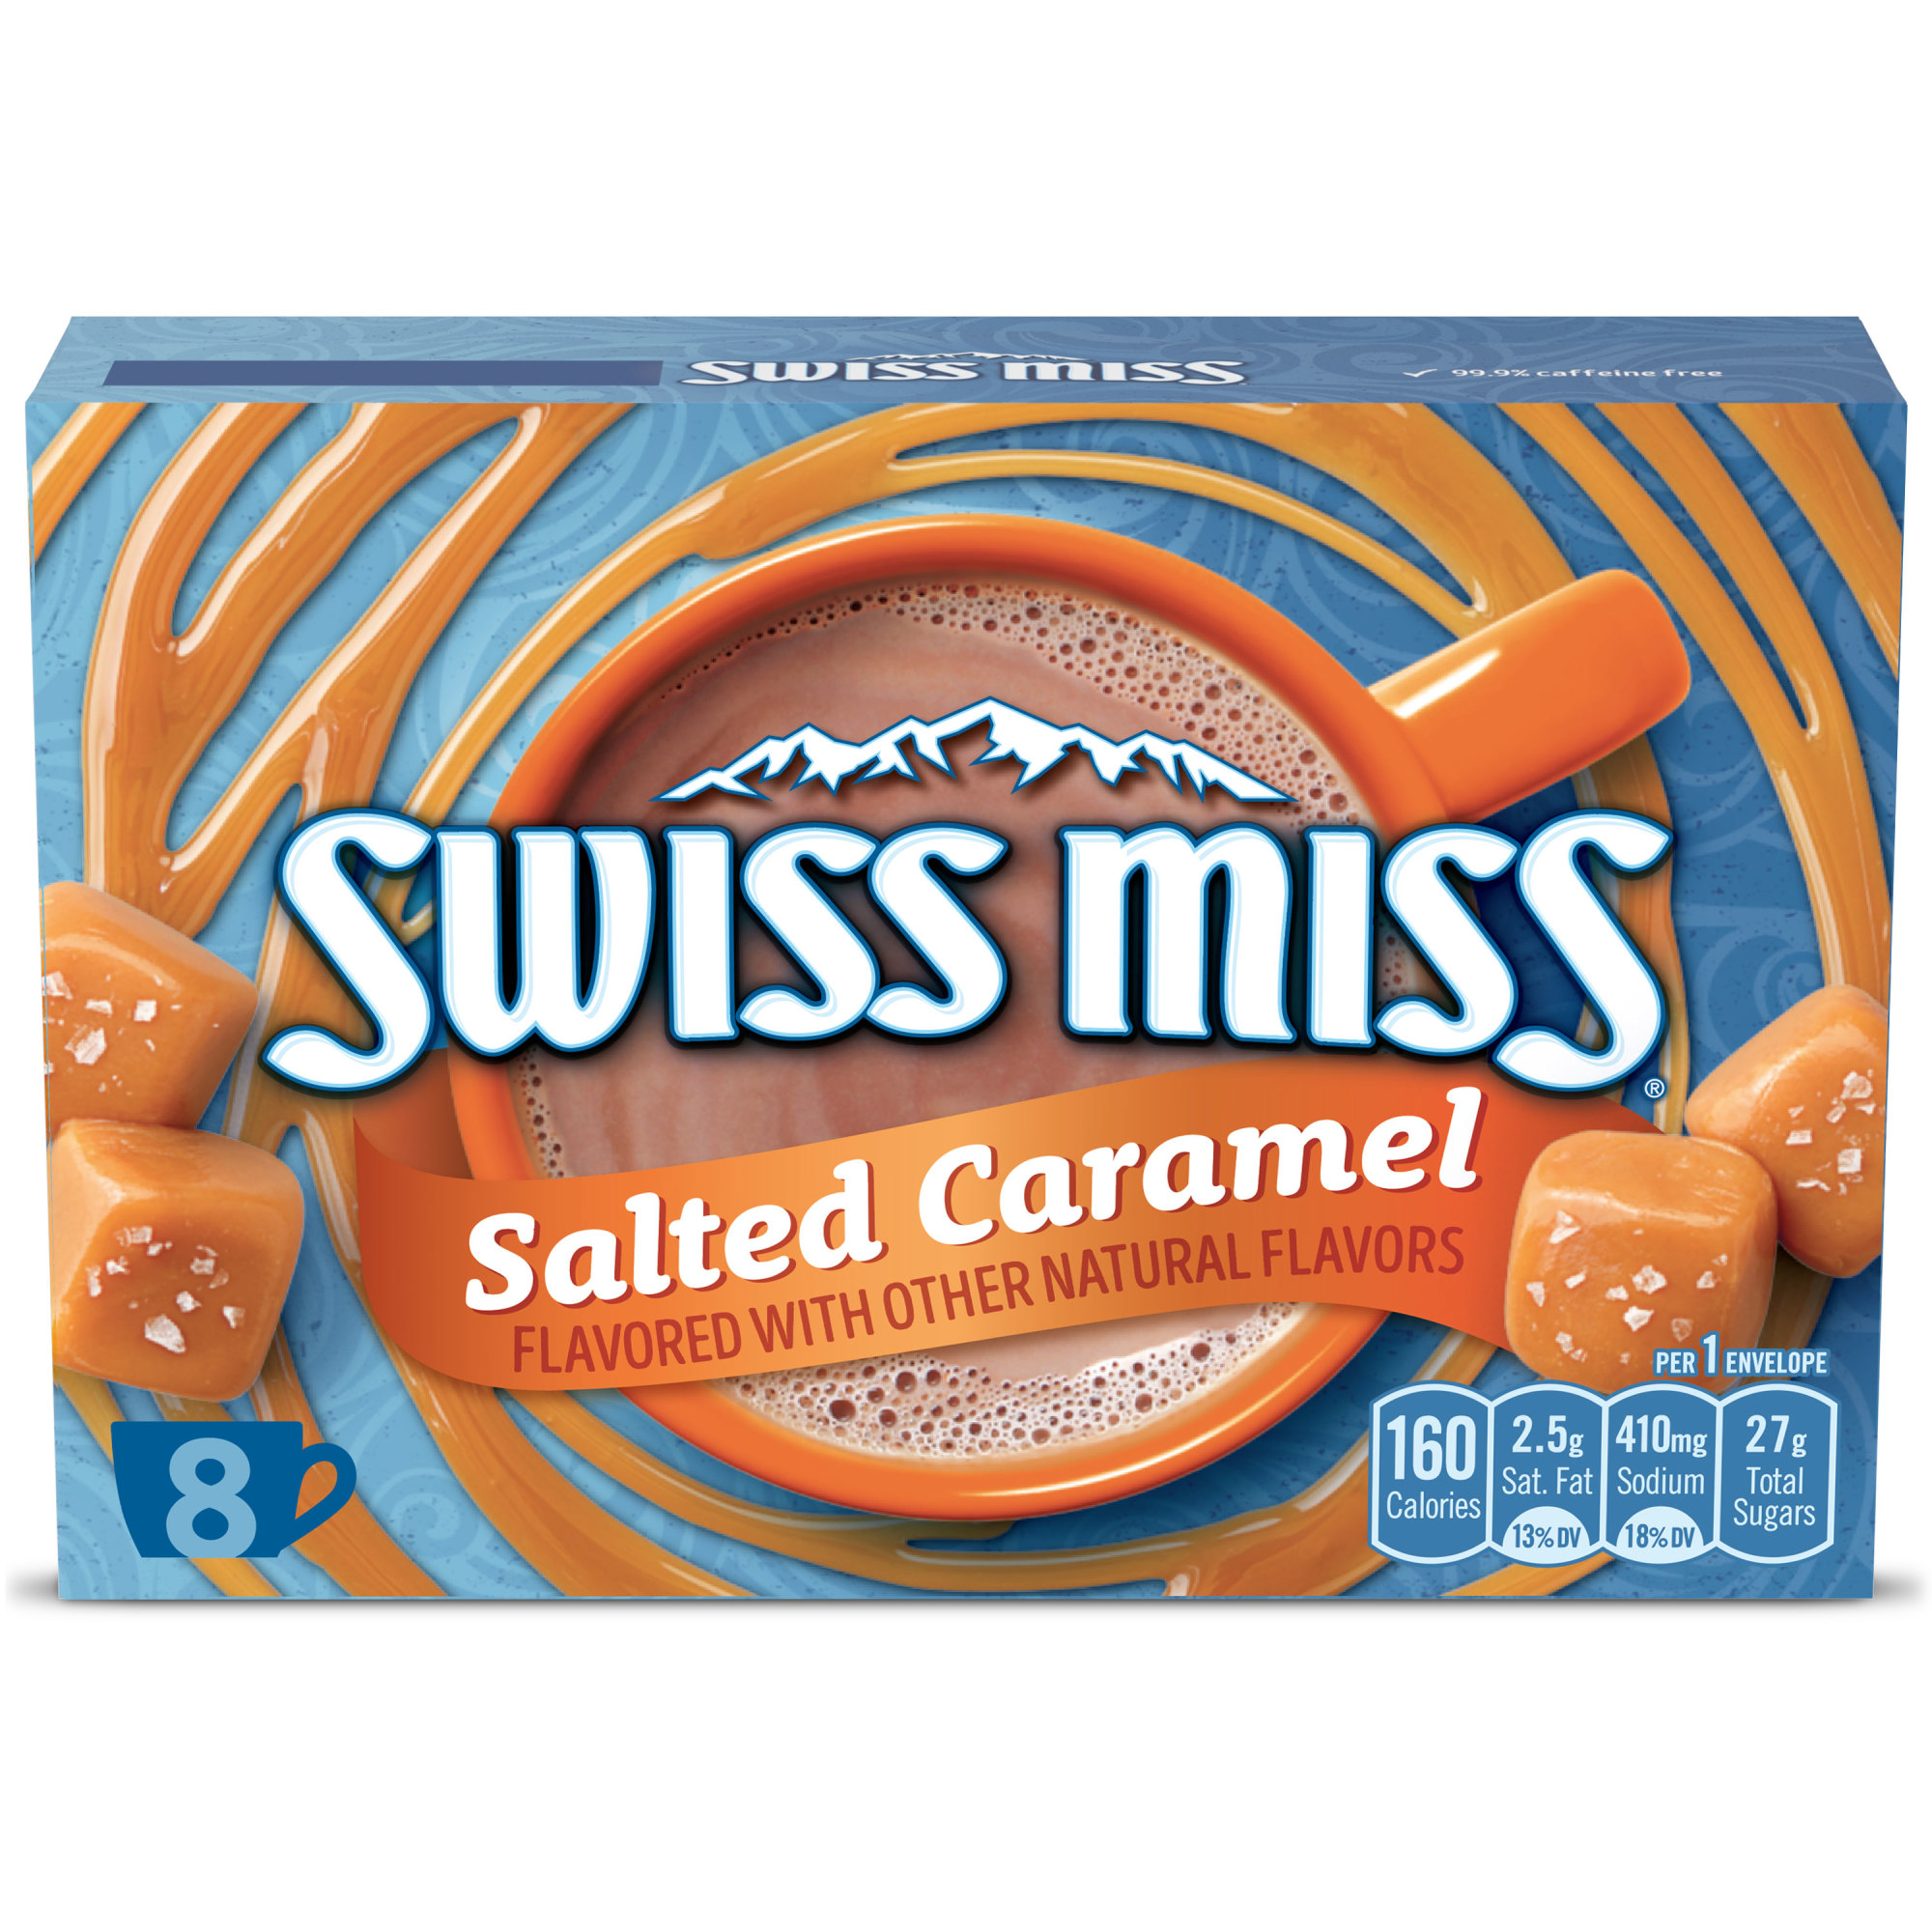 Swiss Miss Salted Caramel Flavored Hot Cocoa Mix, 8 Count Hot Cocoa Mix Packets - image 1 of 9